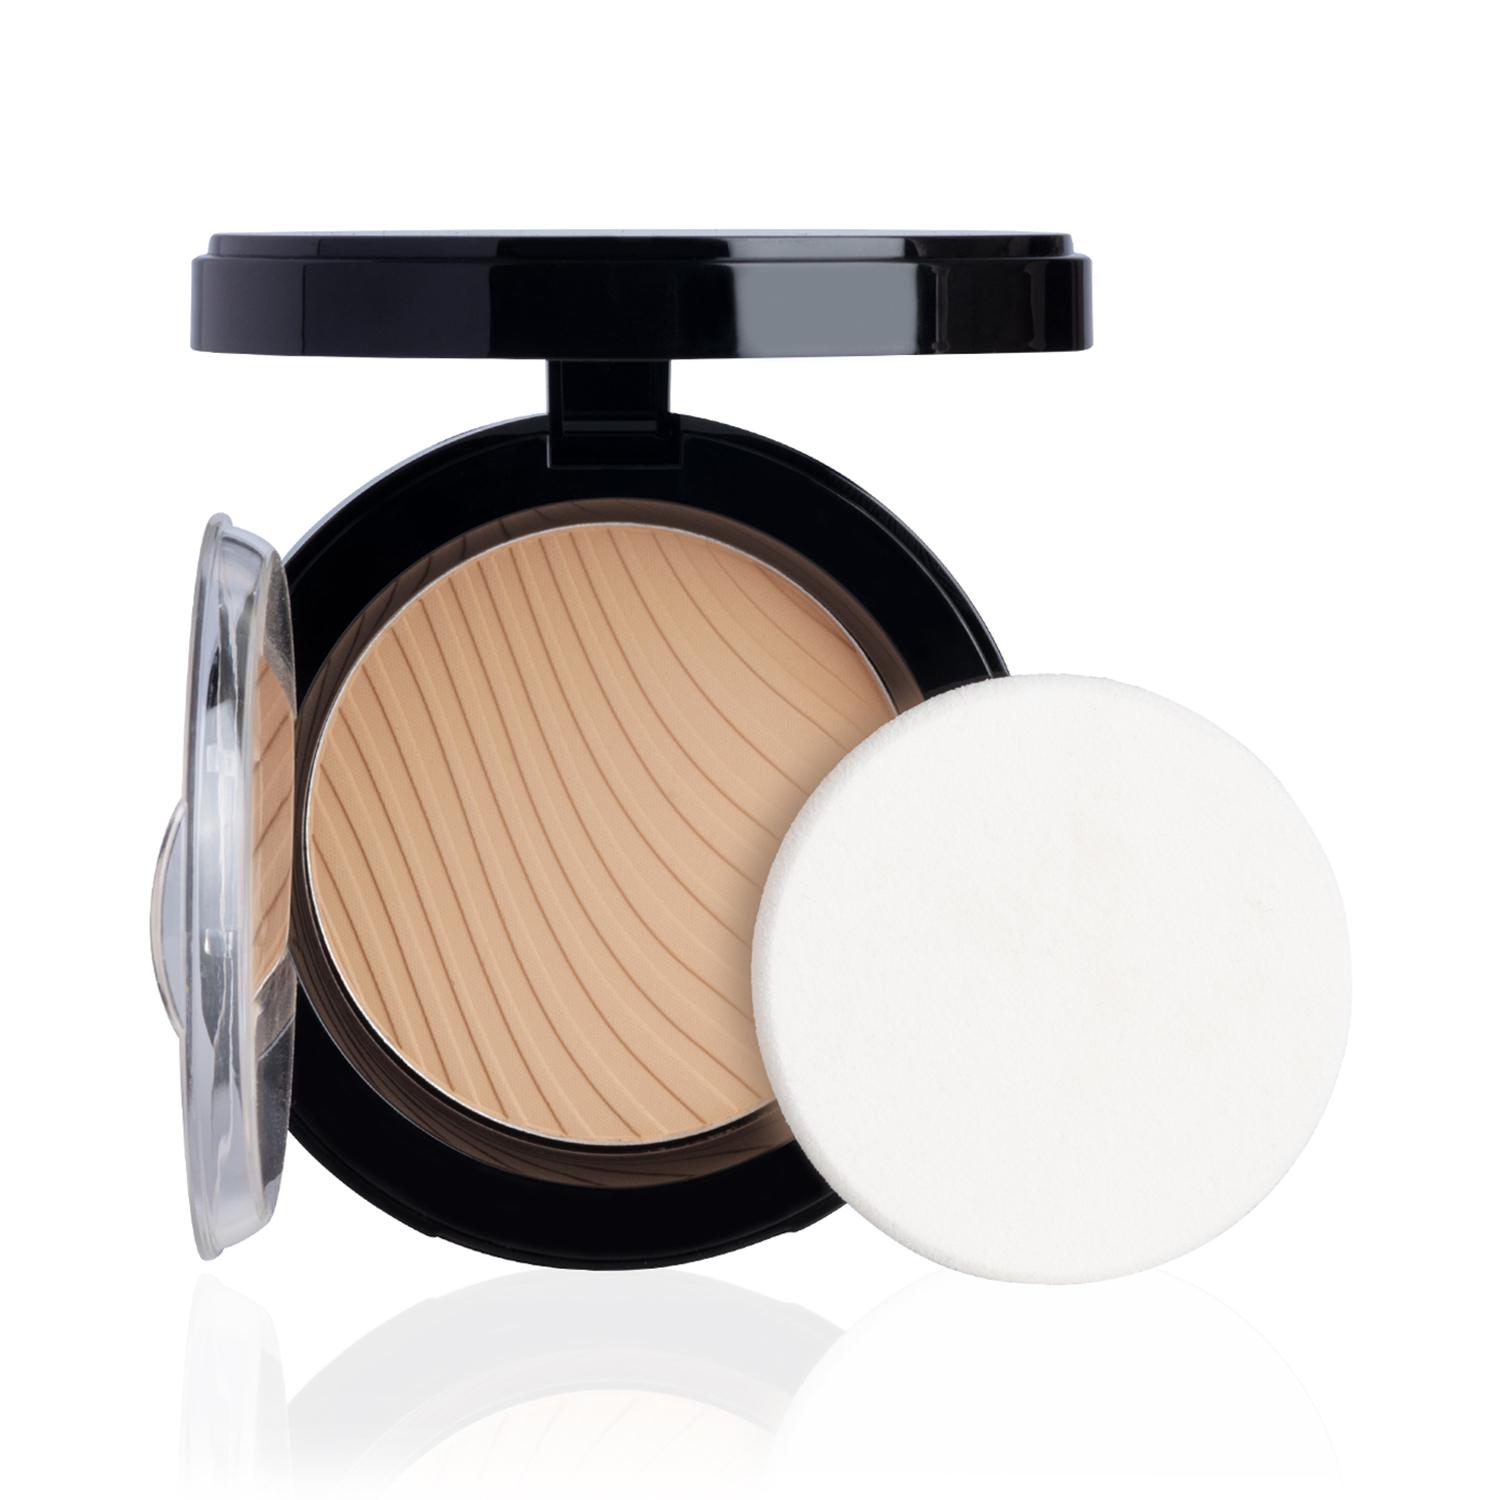 PAC | PAC Take Cover Compact Powder - 07 Midnight Cookie (7.85g)